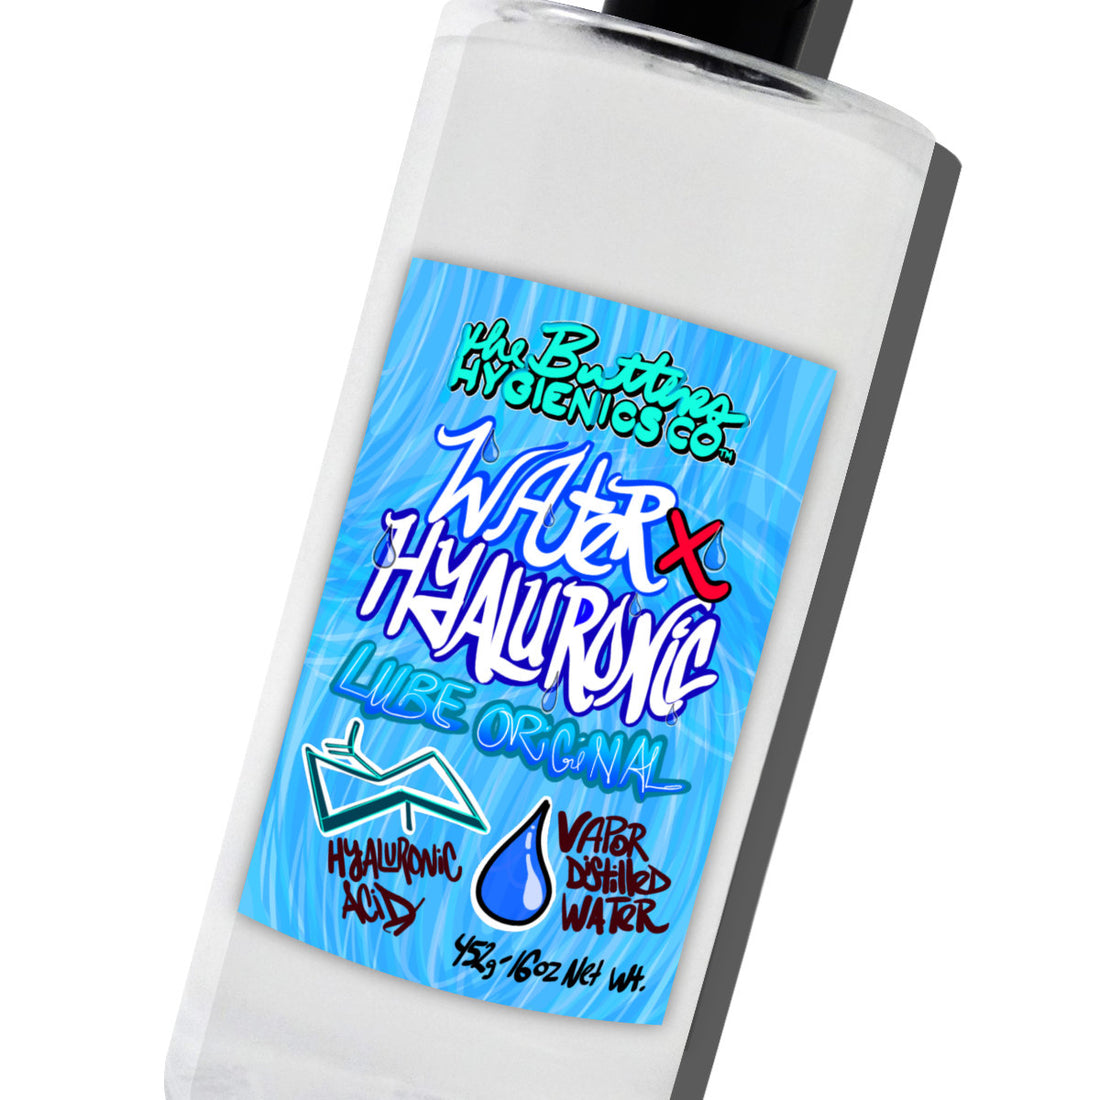 Lube - Water X Hyaluronic (All Sizes) | Product Media & Descriptions